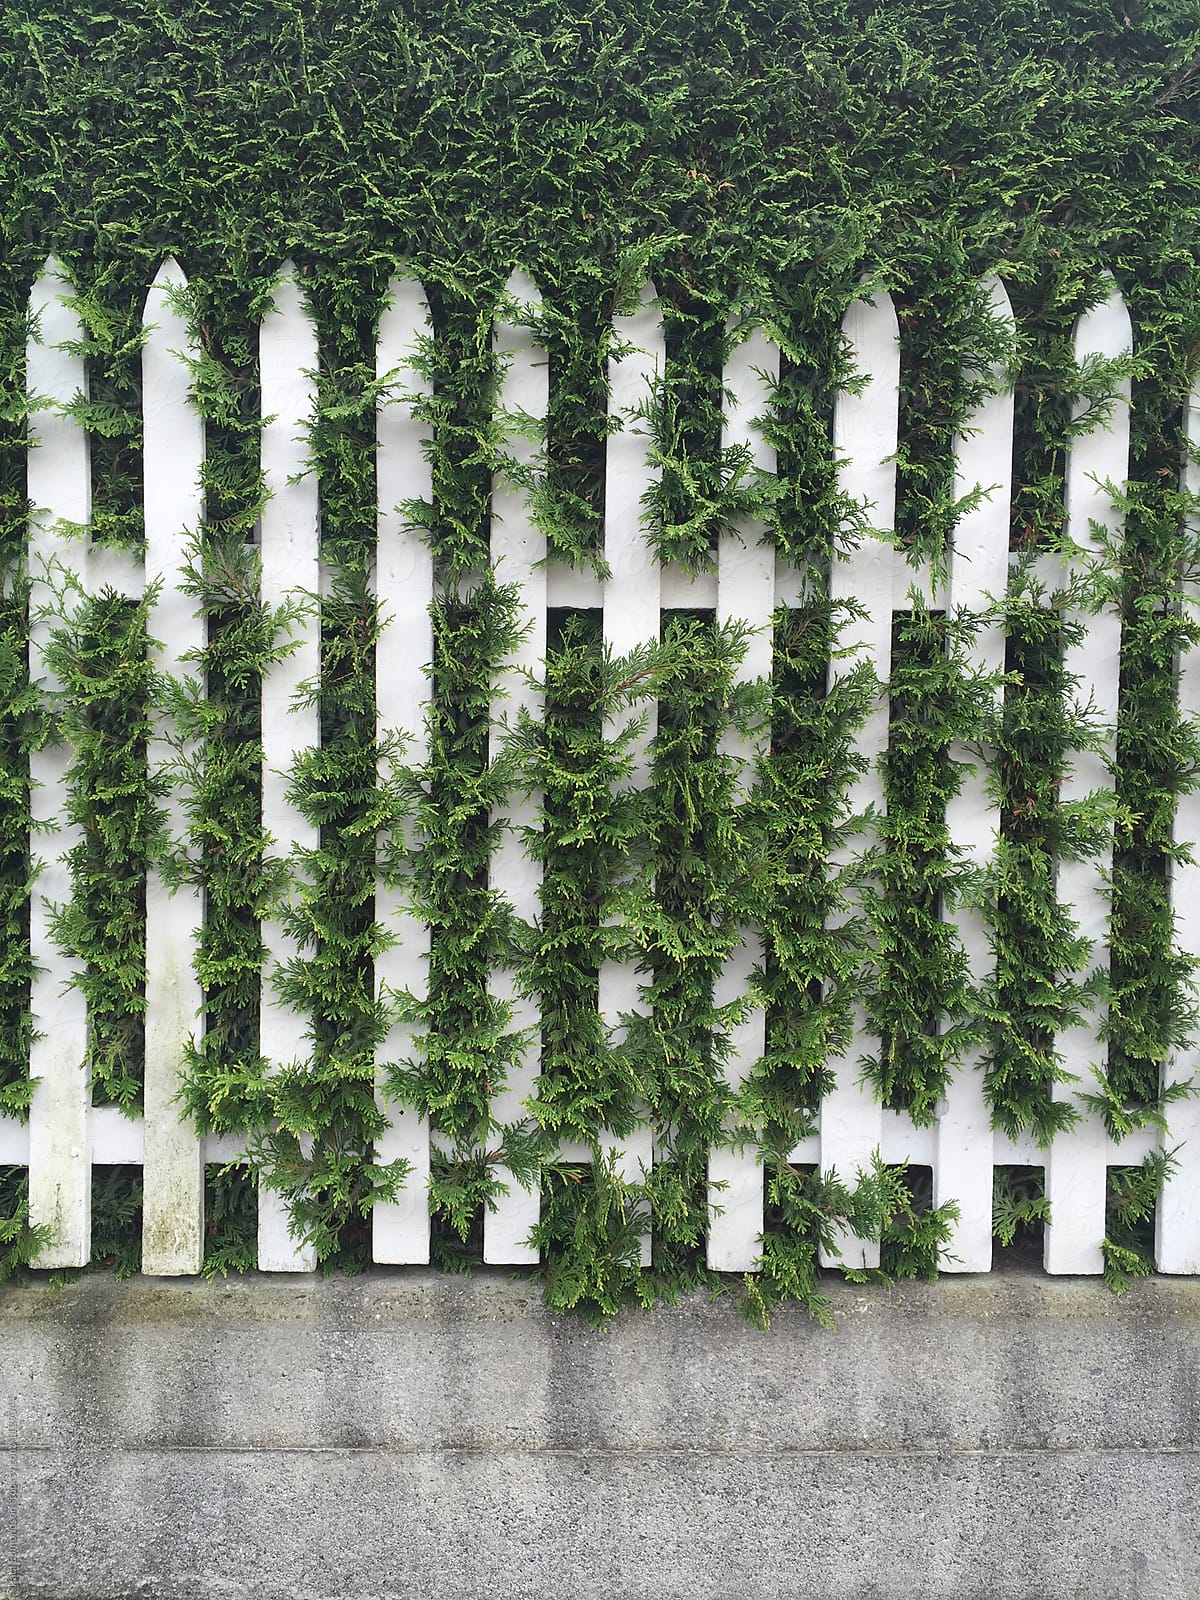 White picket fence with overgrown hedge behind